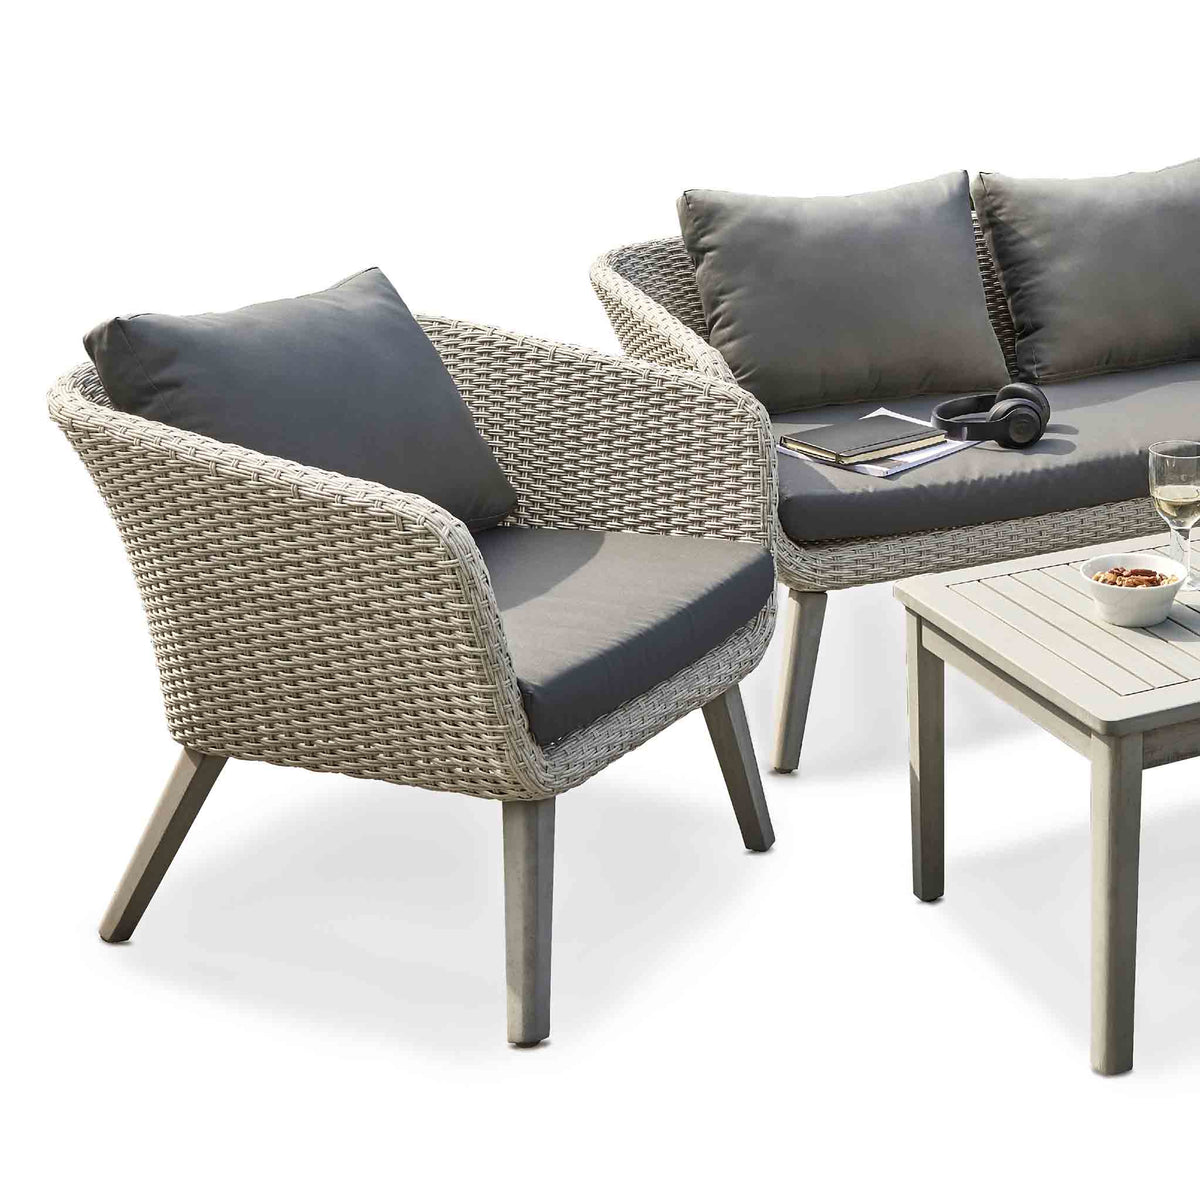 Chatsworth Rattan 4 Seat Lounge Set - Close up of chair and cushions